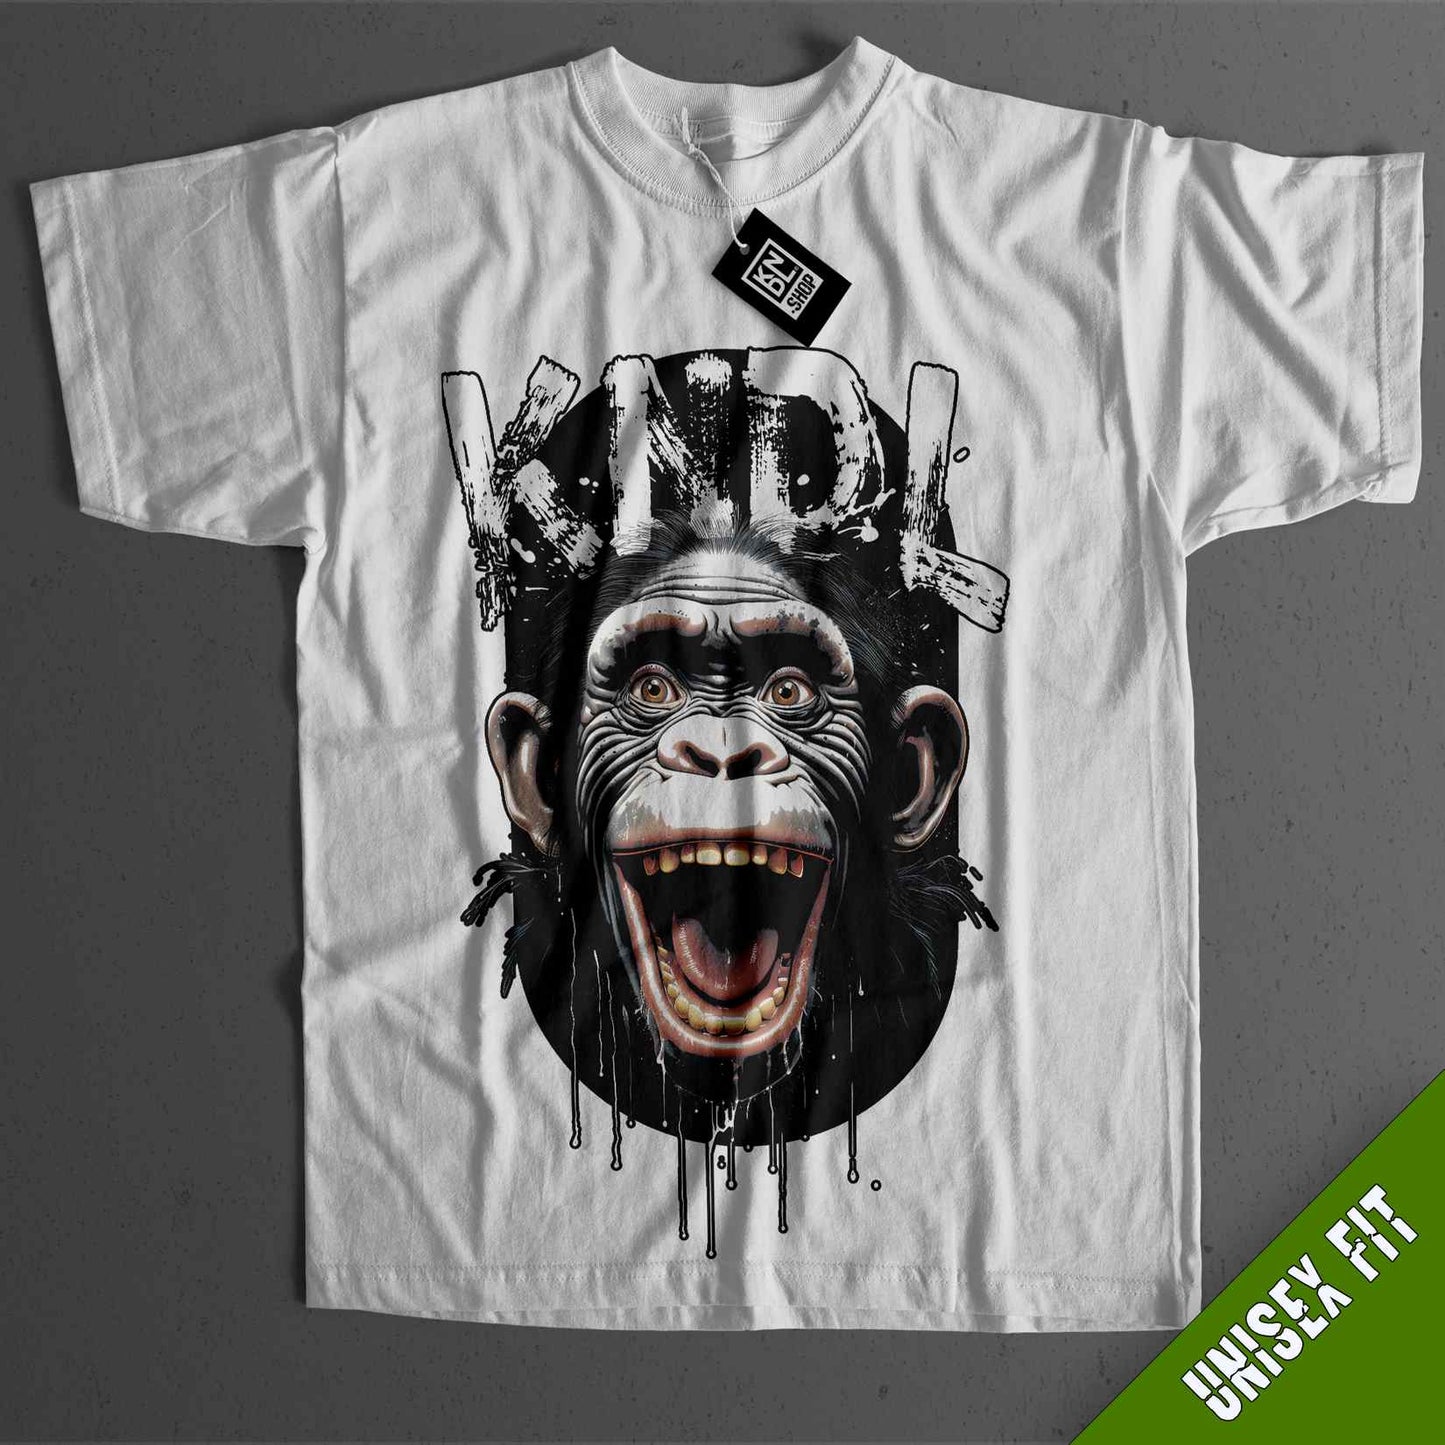 a white t - shirt with an image of a monkey on it